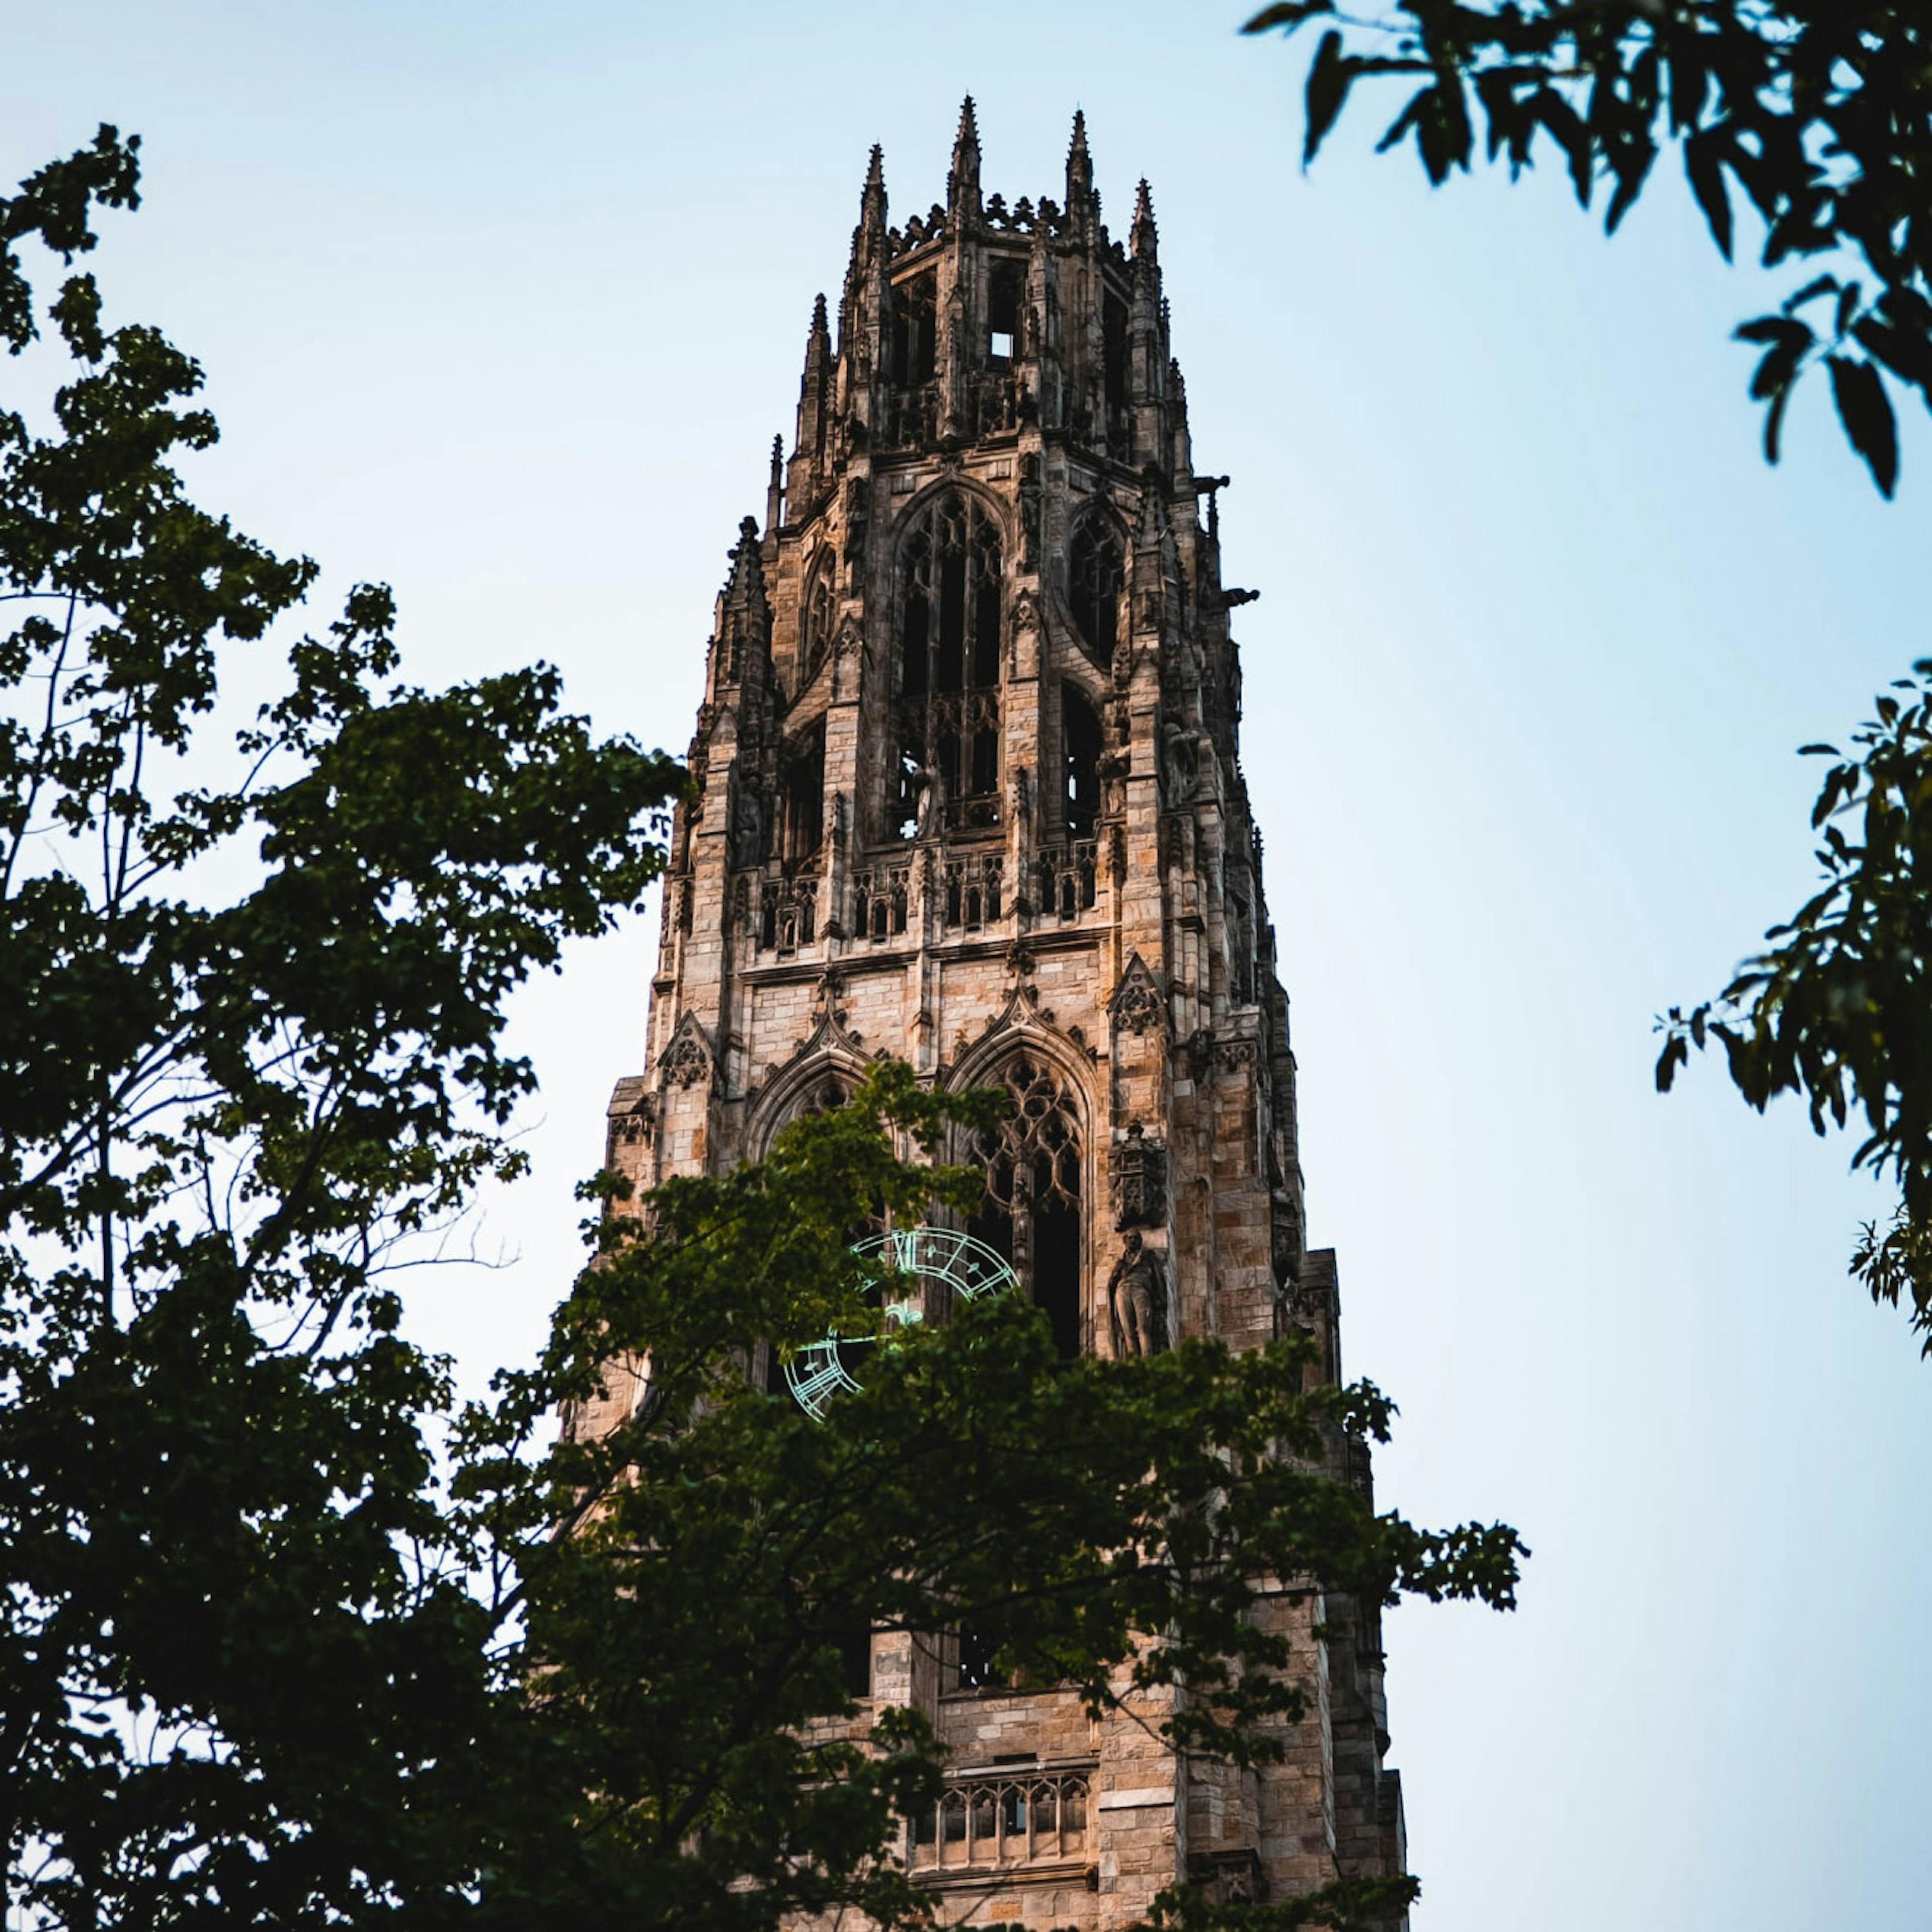 Harkness Tower shares the Yale campus with a psychiatric hospital.